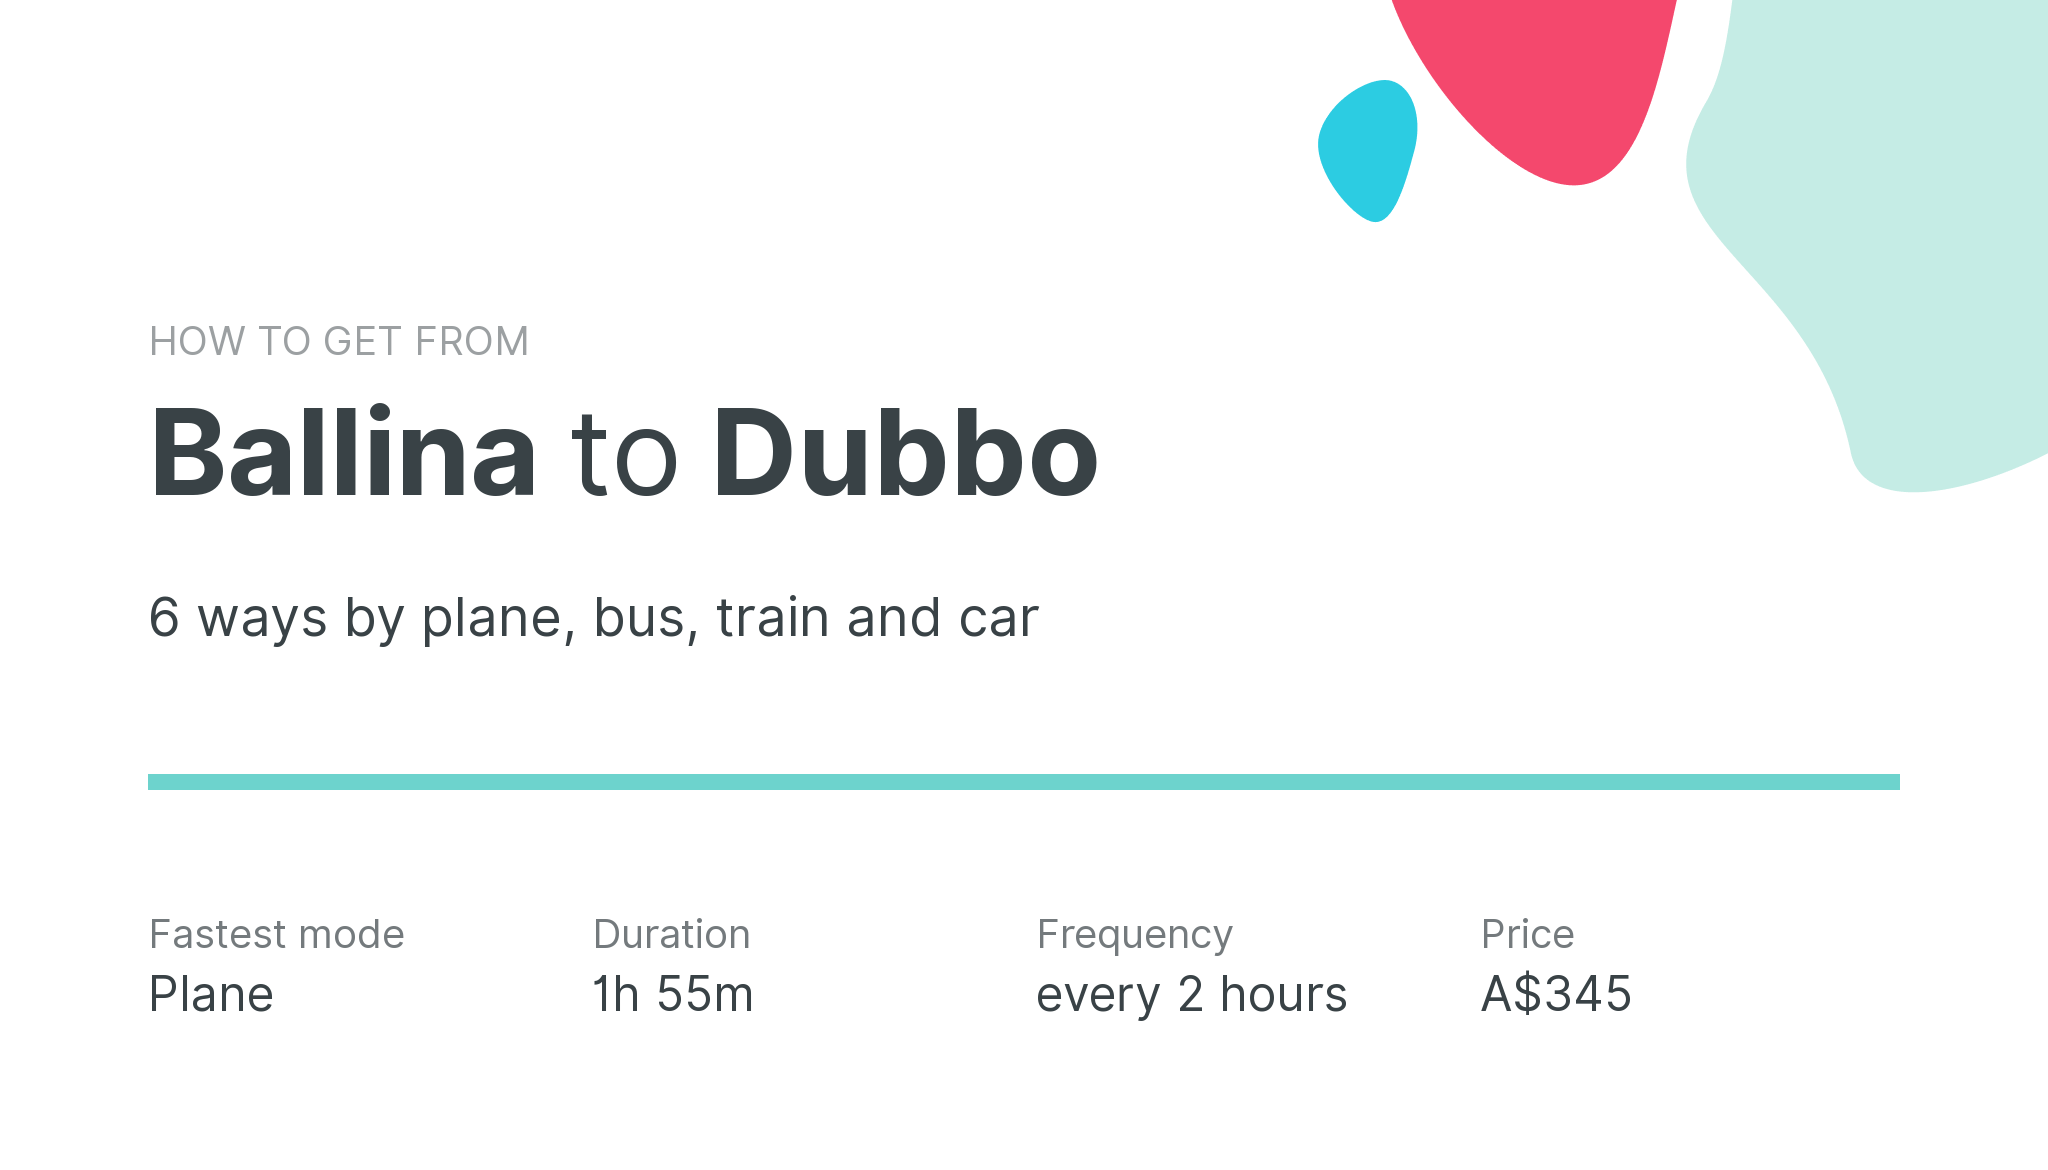 How do I get from Ballina to Dubbo